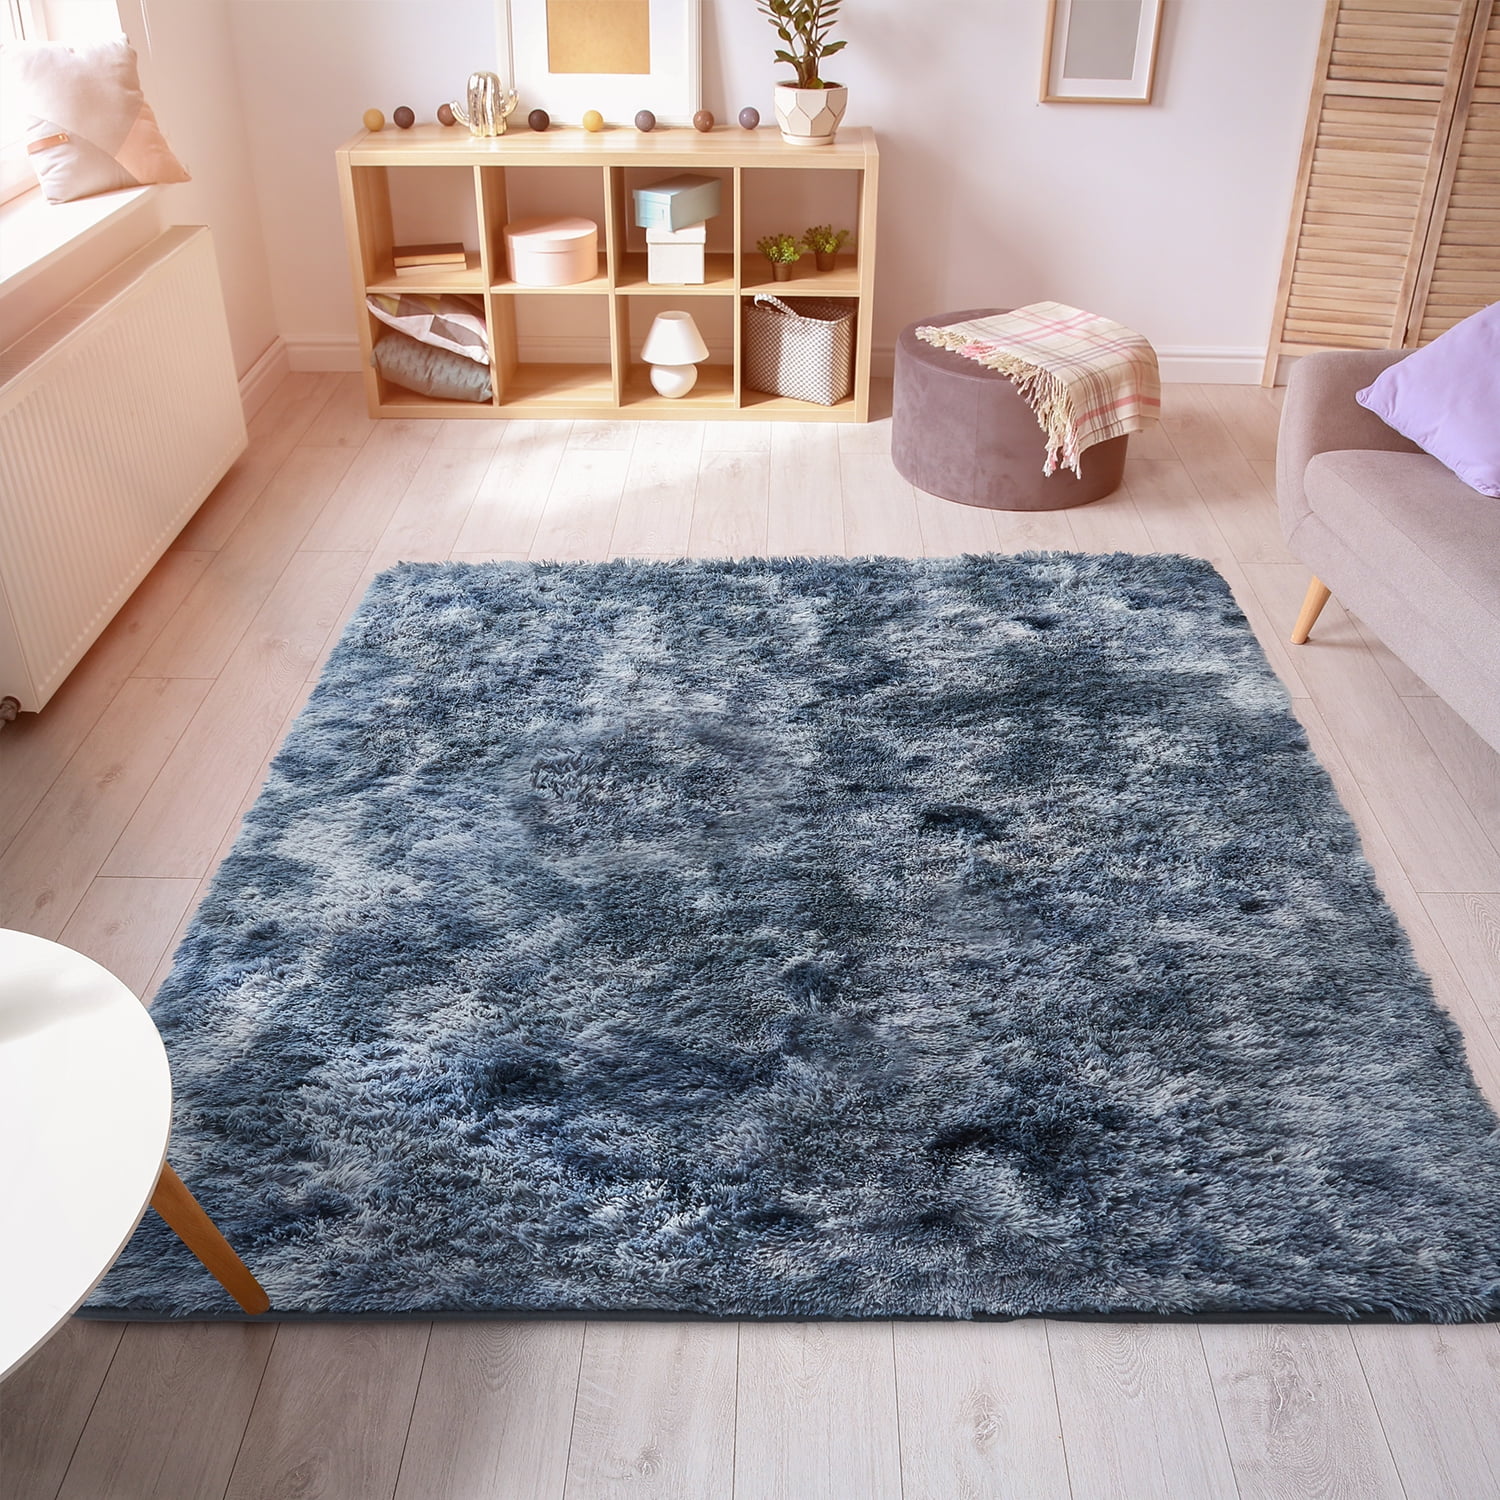 Ophanie Tie Dye Black and Grey Area Rugs for Bedroom Living Room, Fluffy  Shag Fuzzy Carpet